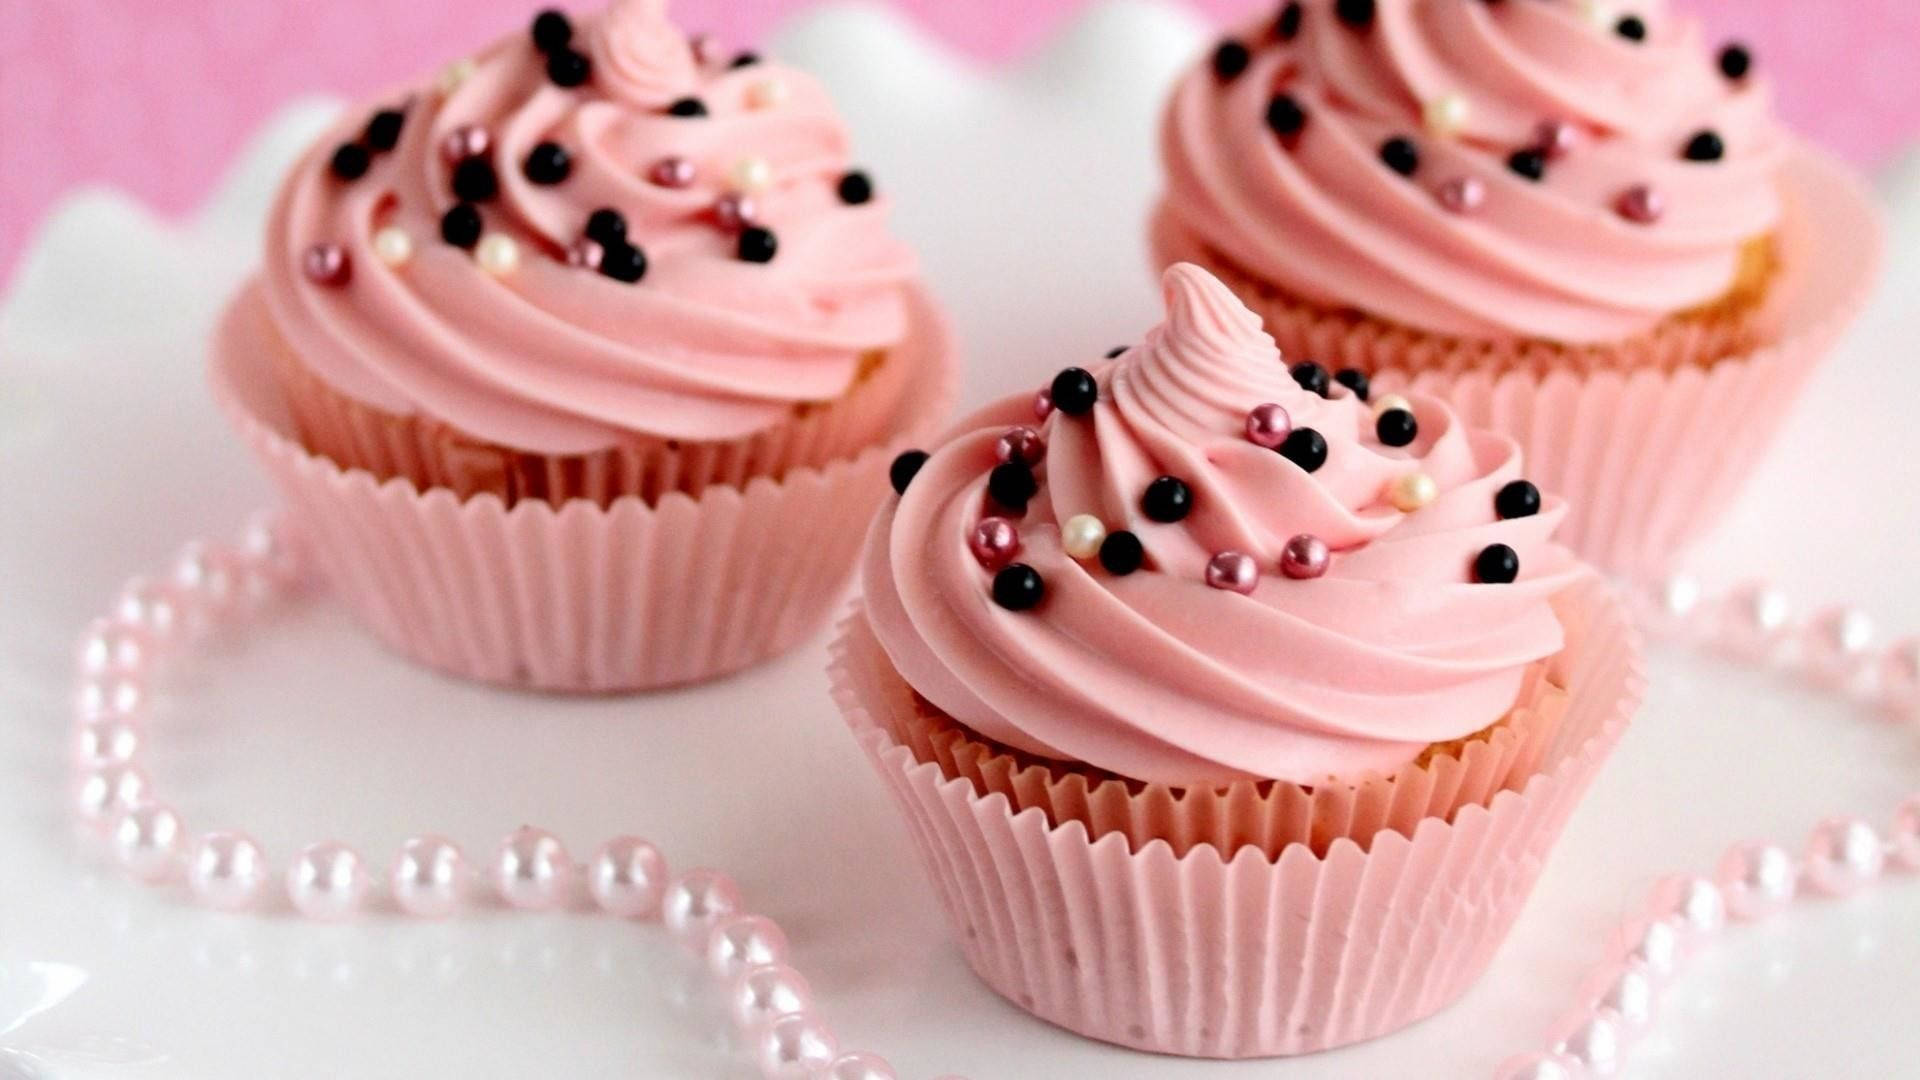 Indulgent Pink Cupcake With Sprinkles Background